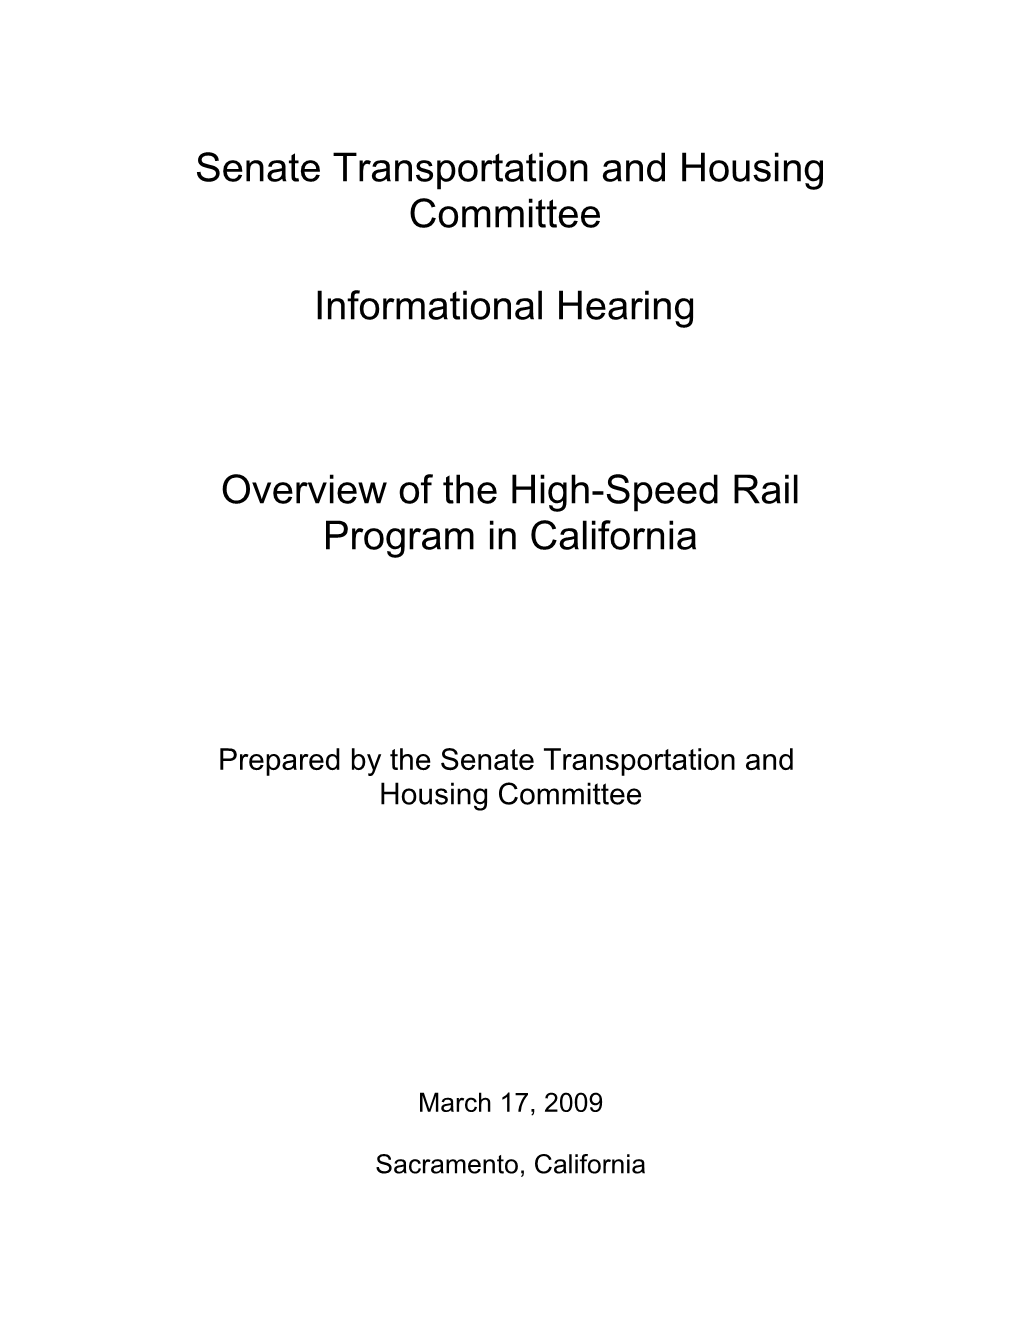 Senate Transportation and Housing Committee